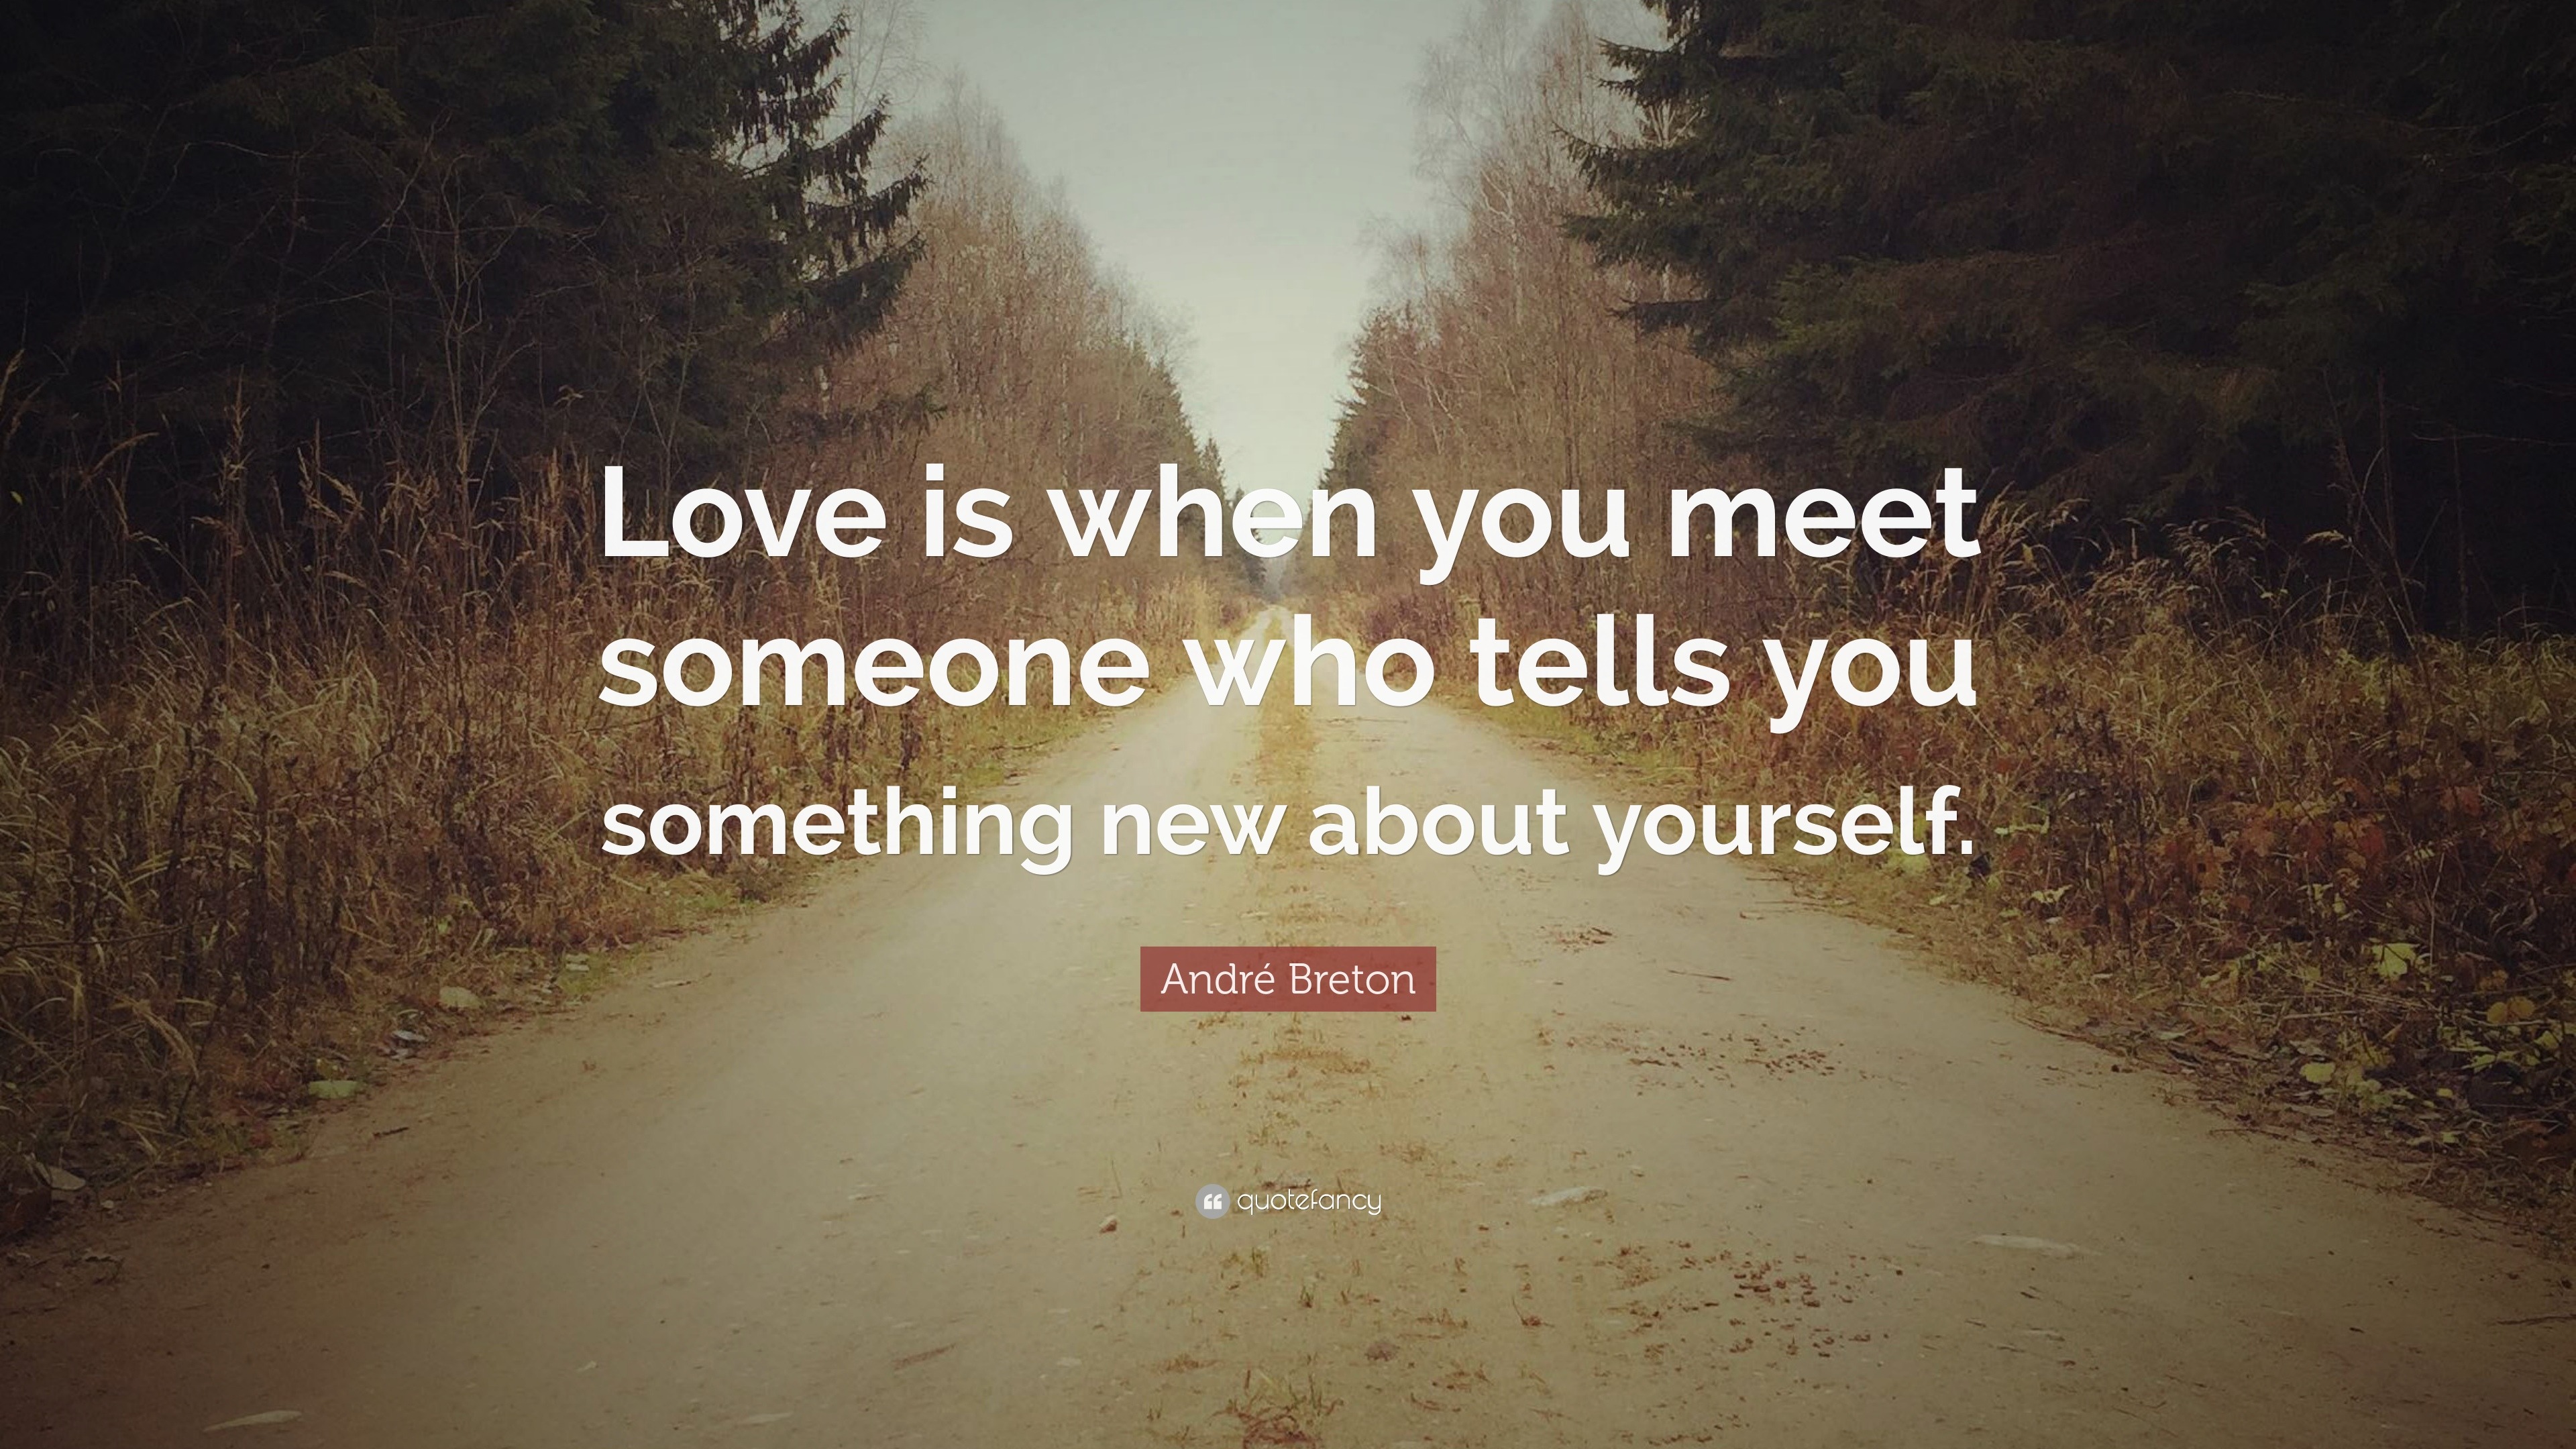 André Breton Quote: “Love is when you meet someone who tells you